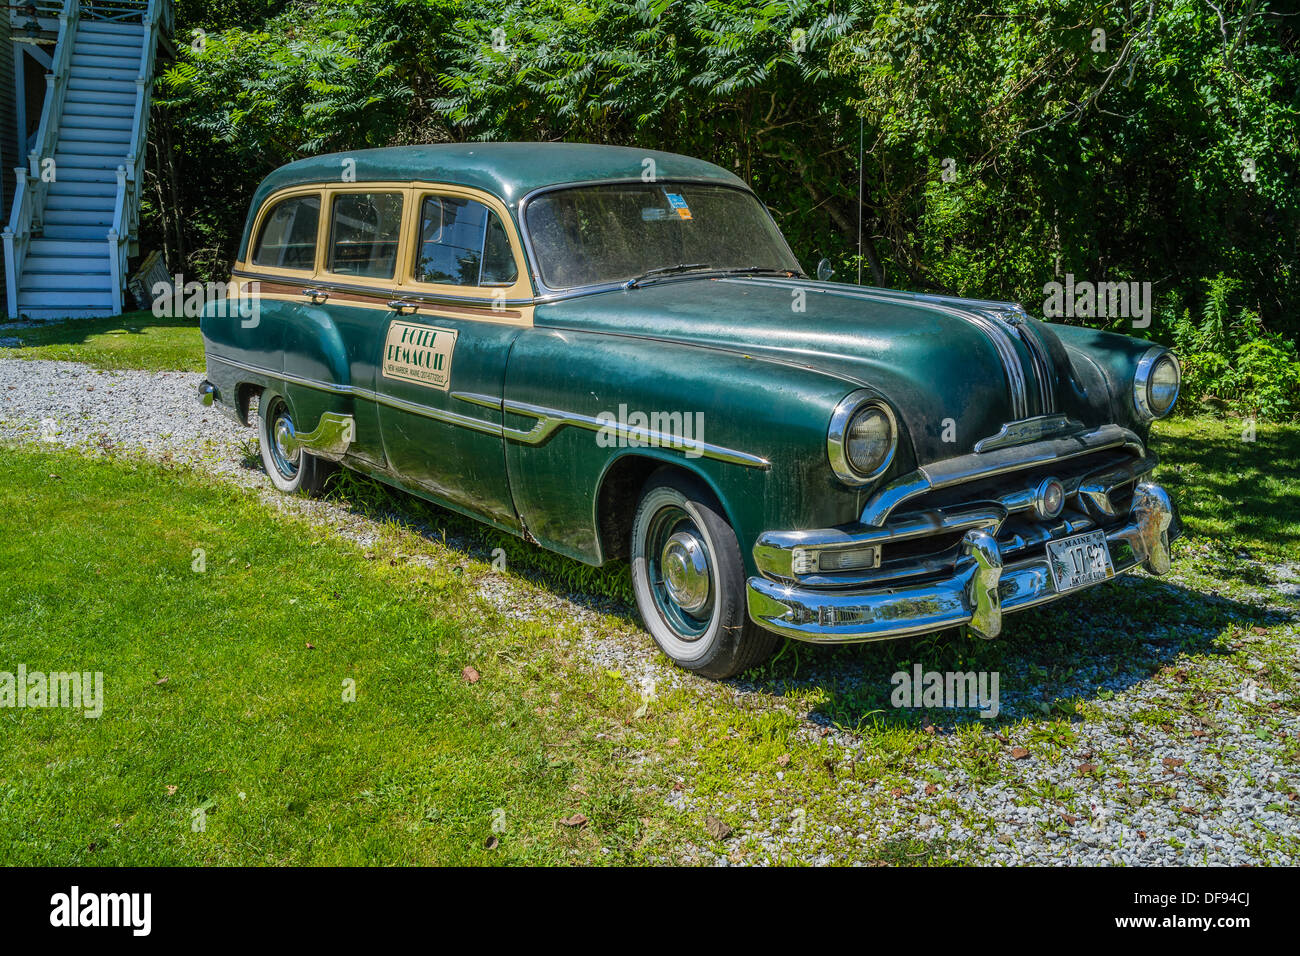 A front view of the courtesy car for the historic Hotel Pemaquid in Pemaquid, Maine, a 1953 Pontiac woody. Stock Photo